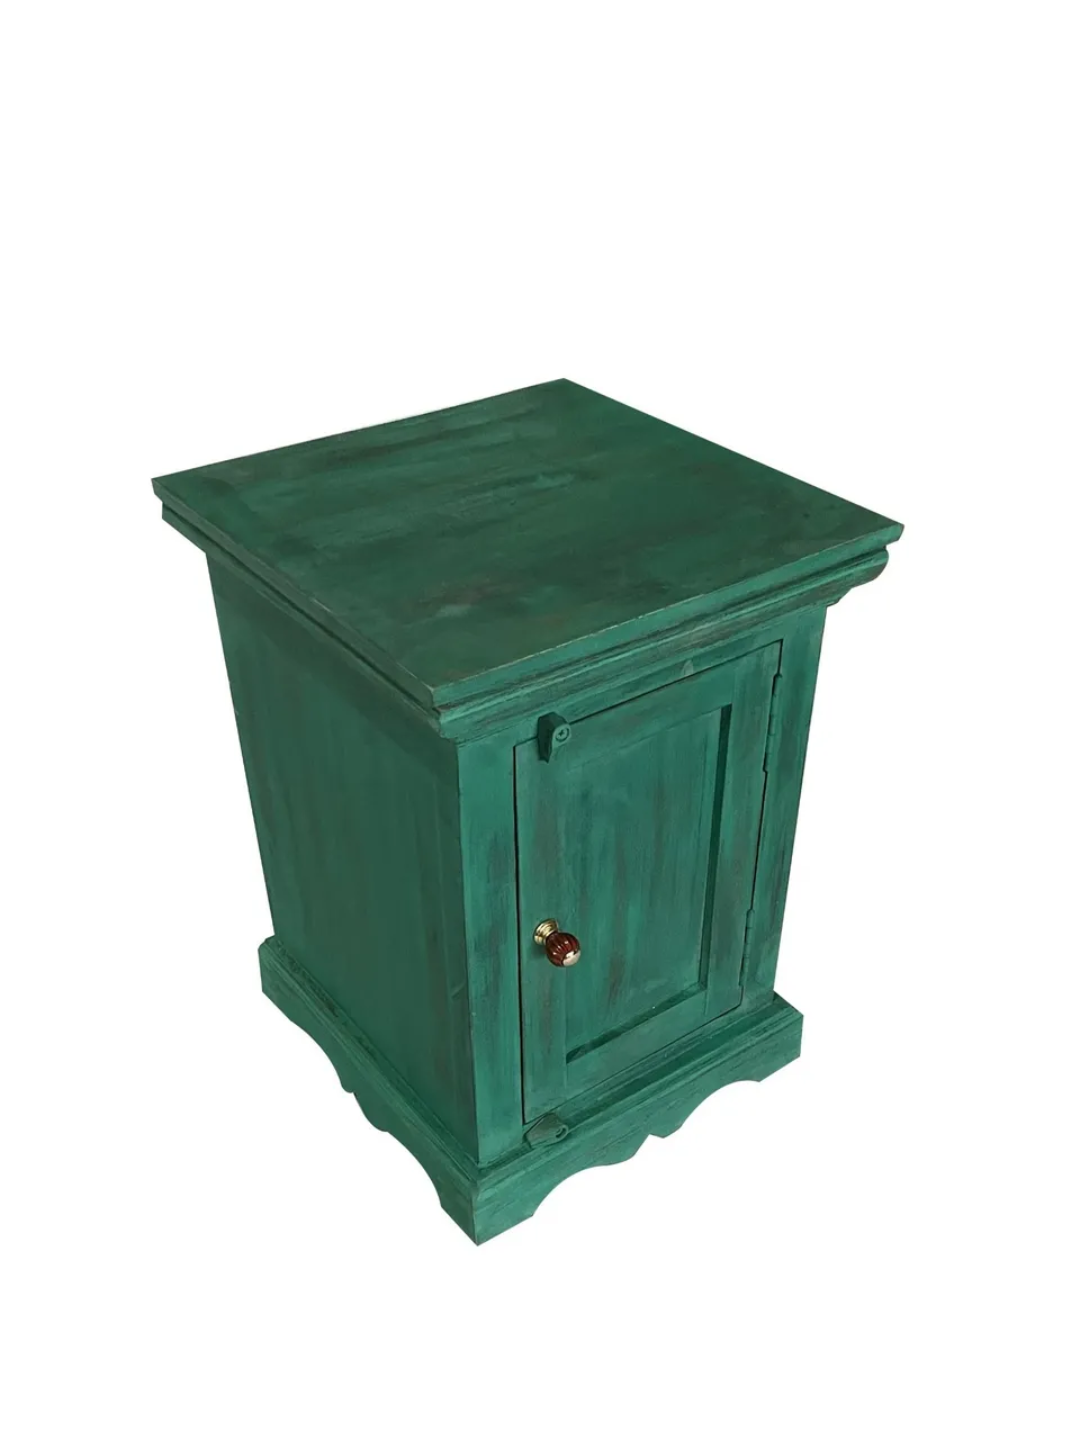 Queens Sheesham Wood Bedside Table in Antique Green Finish